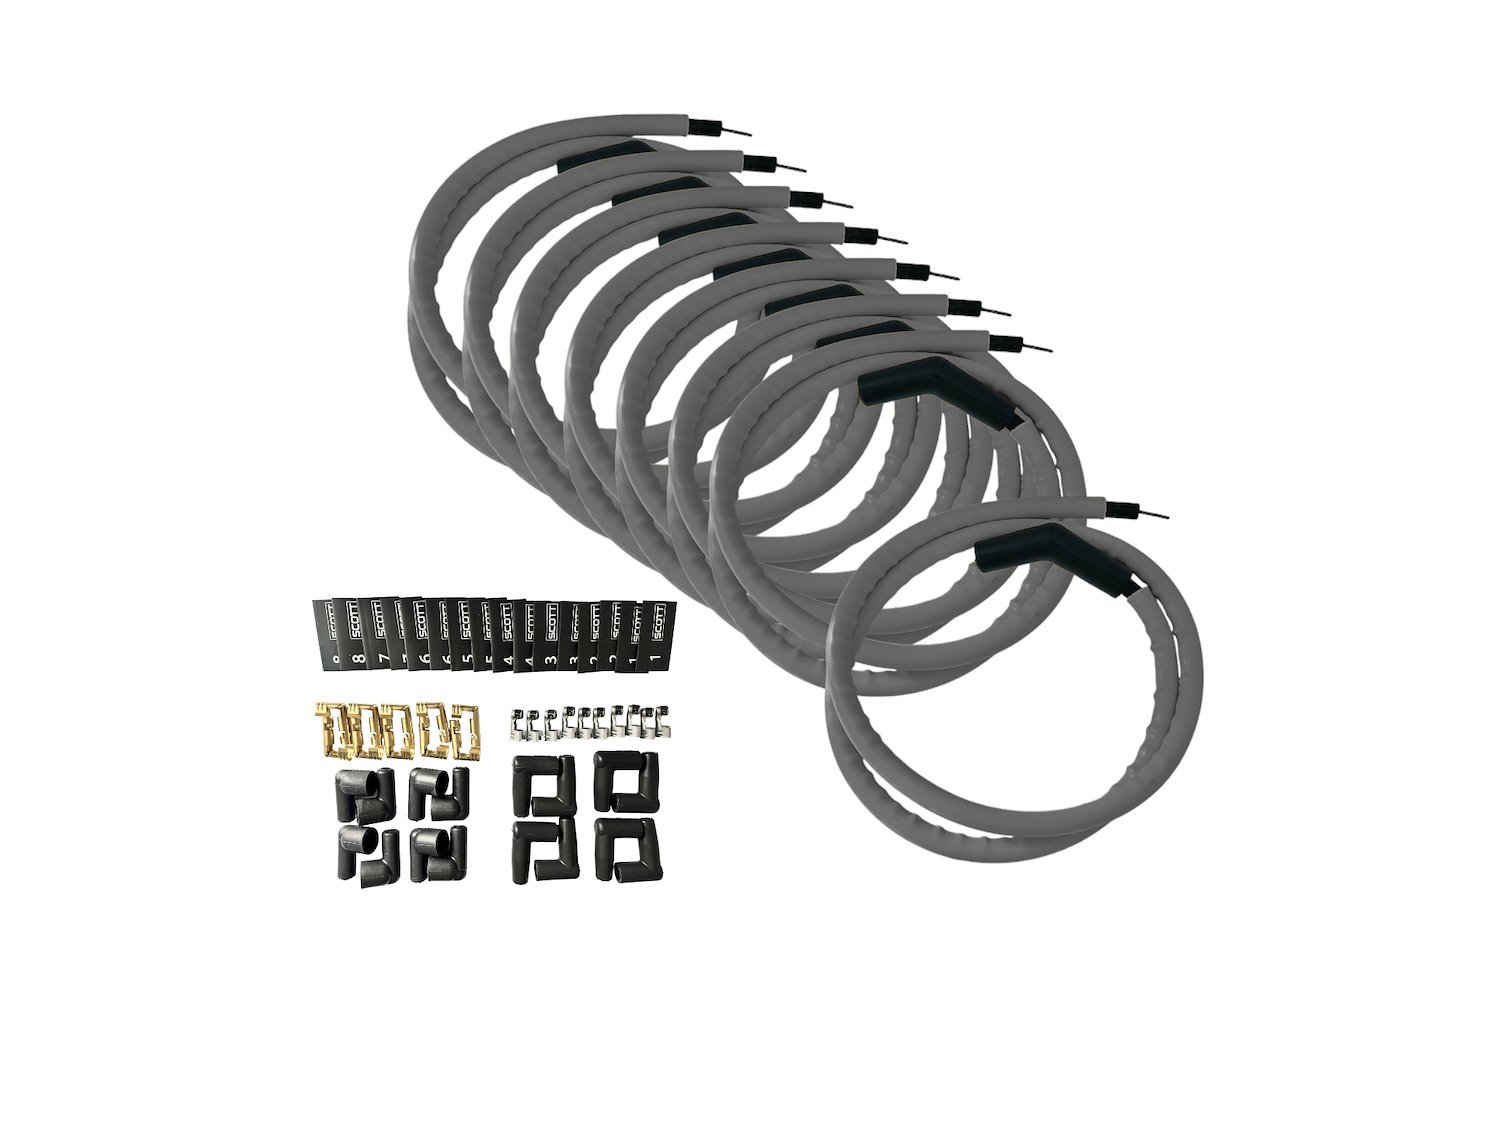 SPW300-CH-K45-3 DIY Super Mag Fiberglass-Oversleeved Spark Plug Wire Set, 45-Degree Boots [Gray]